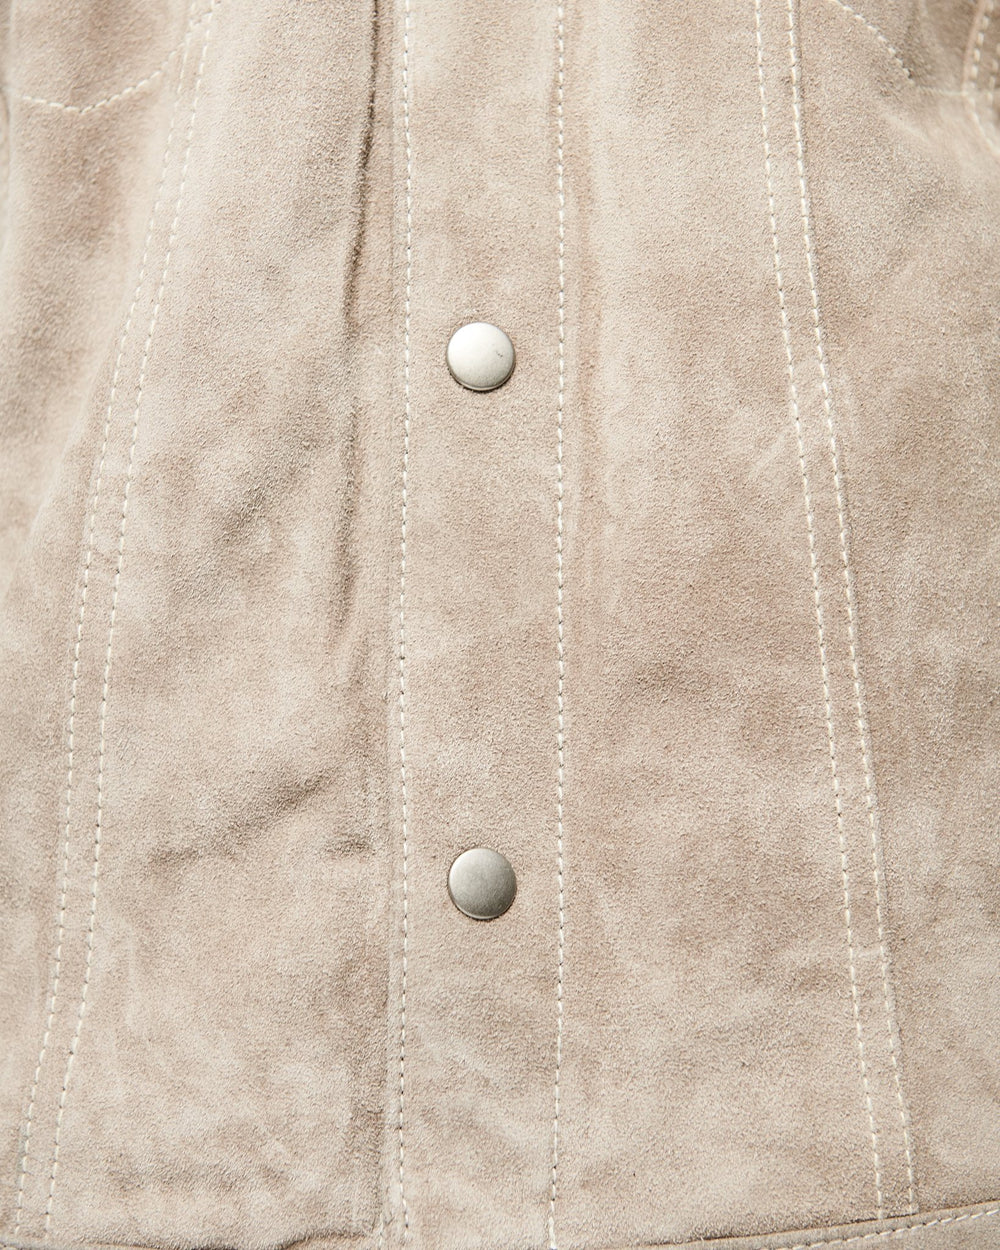 MODERN SUEDE JACKET WITH COLLAR